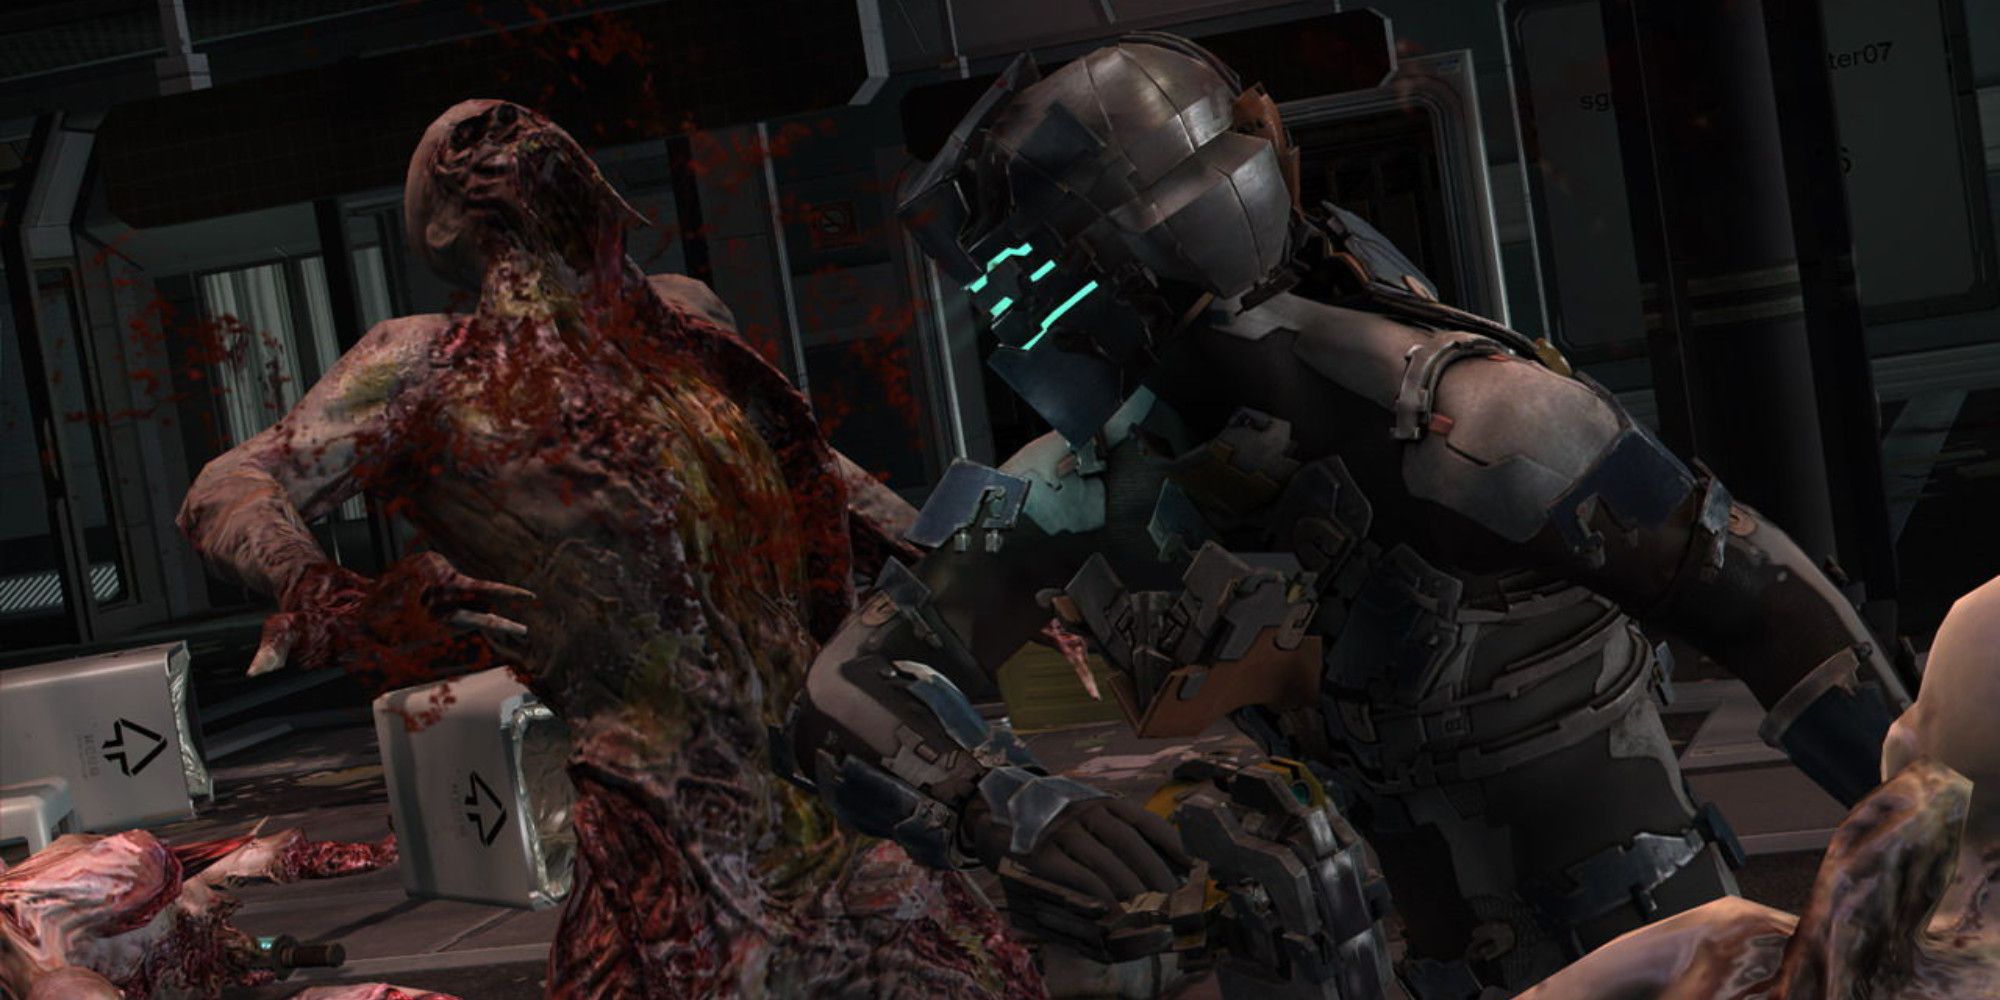 Isaac whacking a nercomorph in Dead Space 2